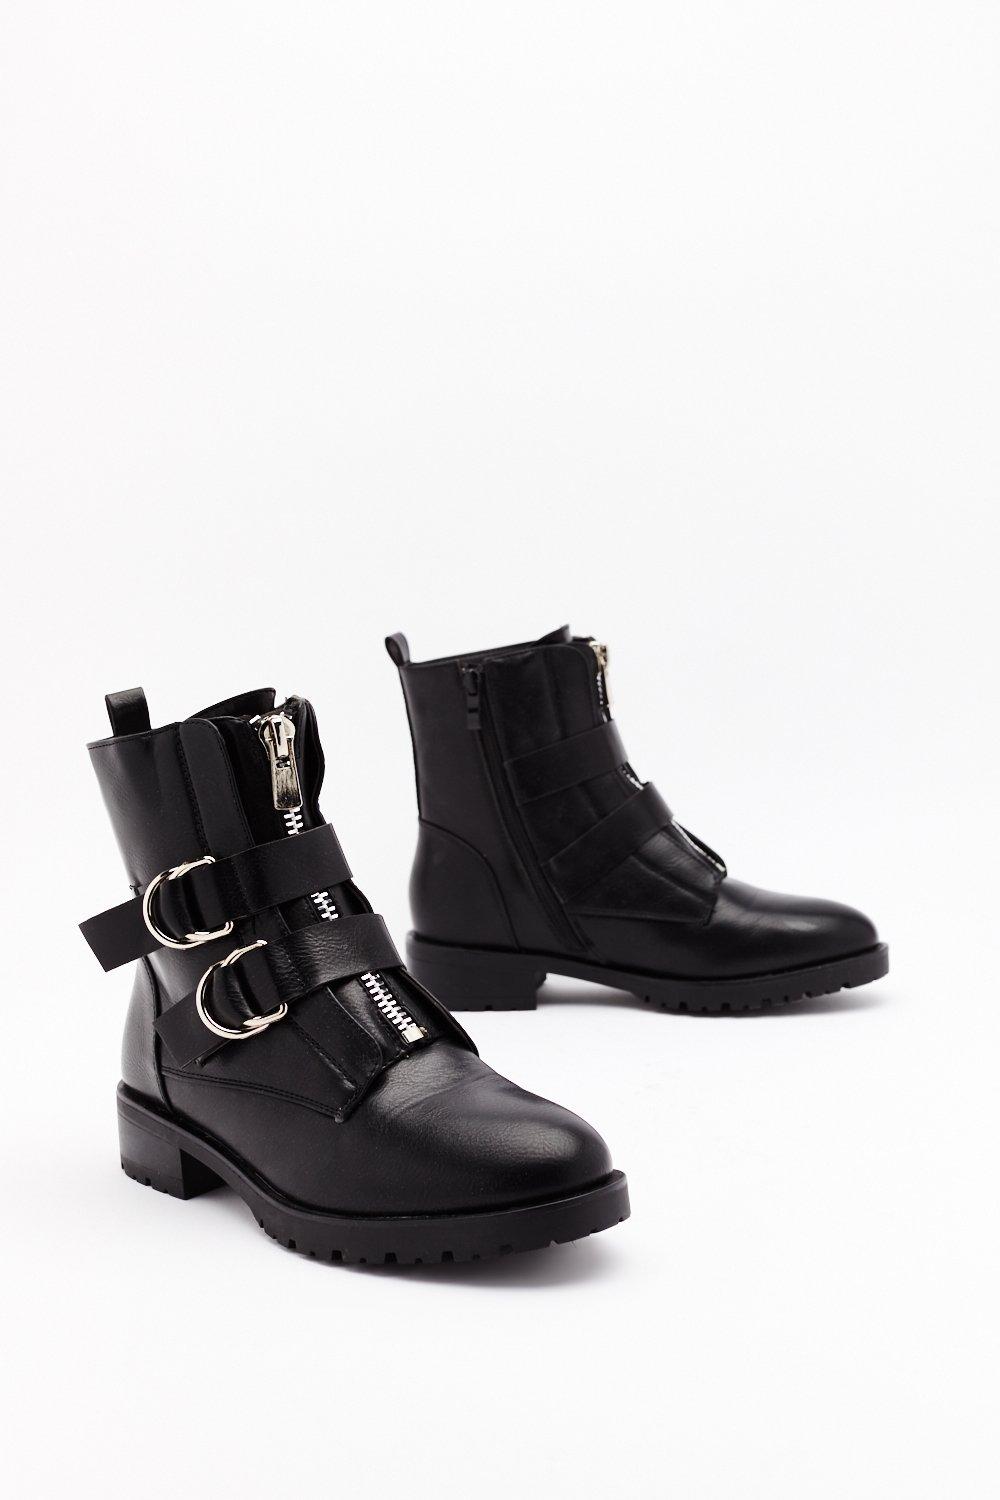 D-Ring is for Buckle Biker Boots 